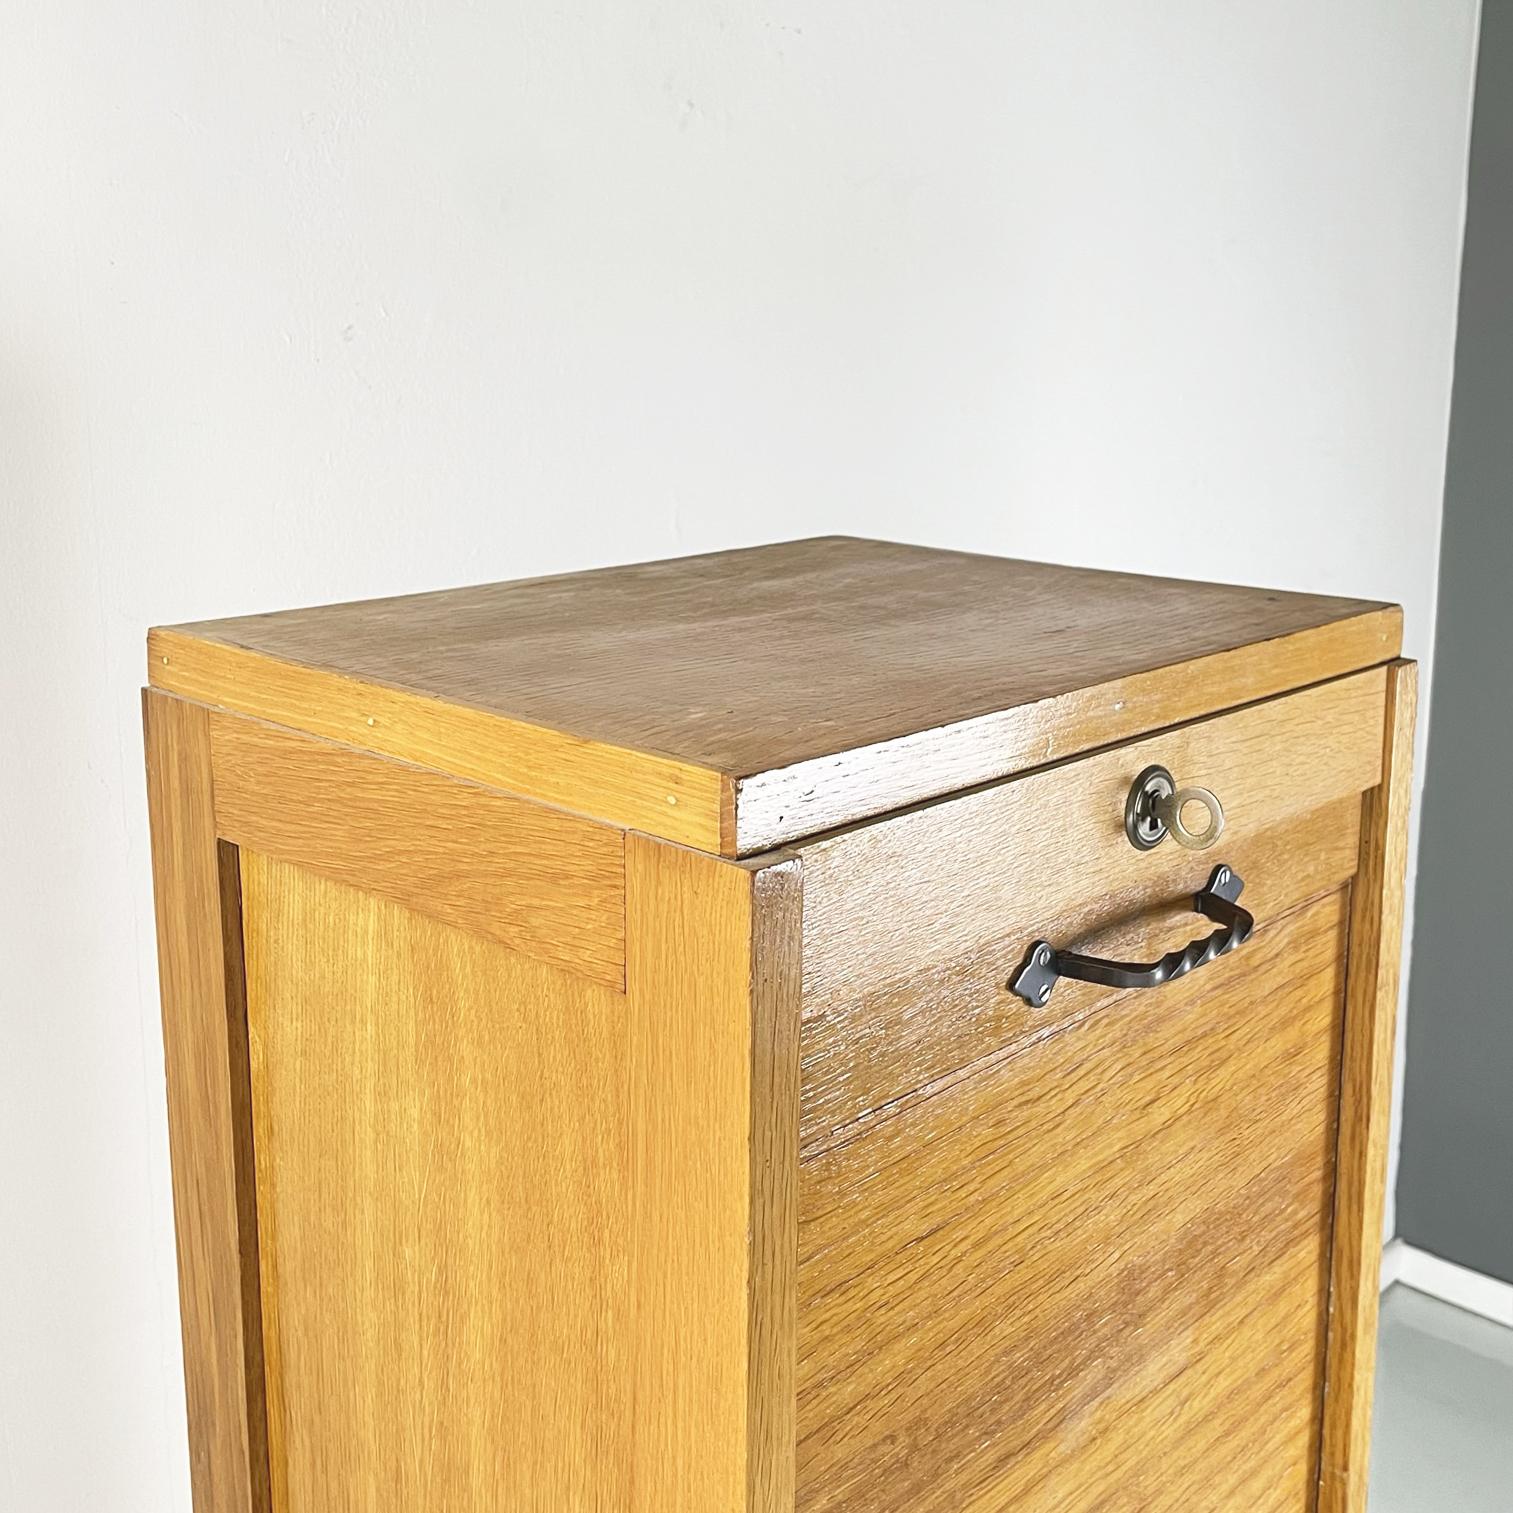 Italian Mid-Century Modern Wooden Office Filing Cabine Archive Dresser, 1940s For Sale 1